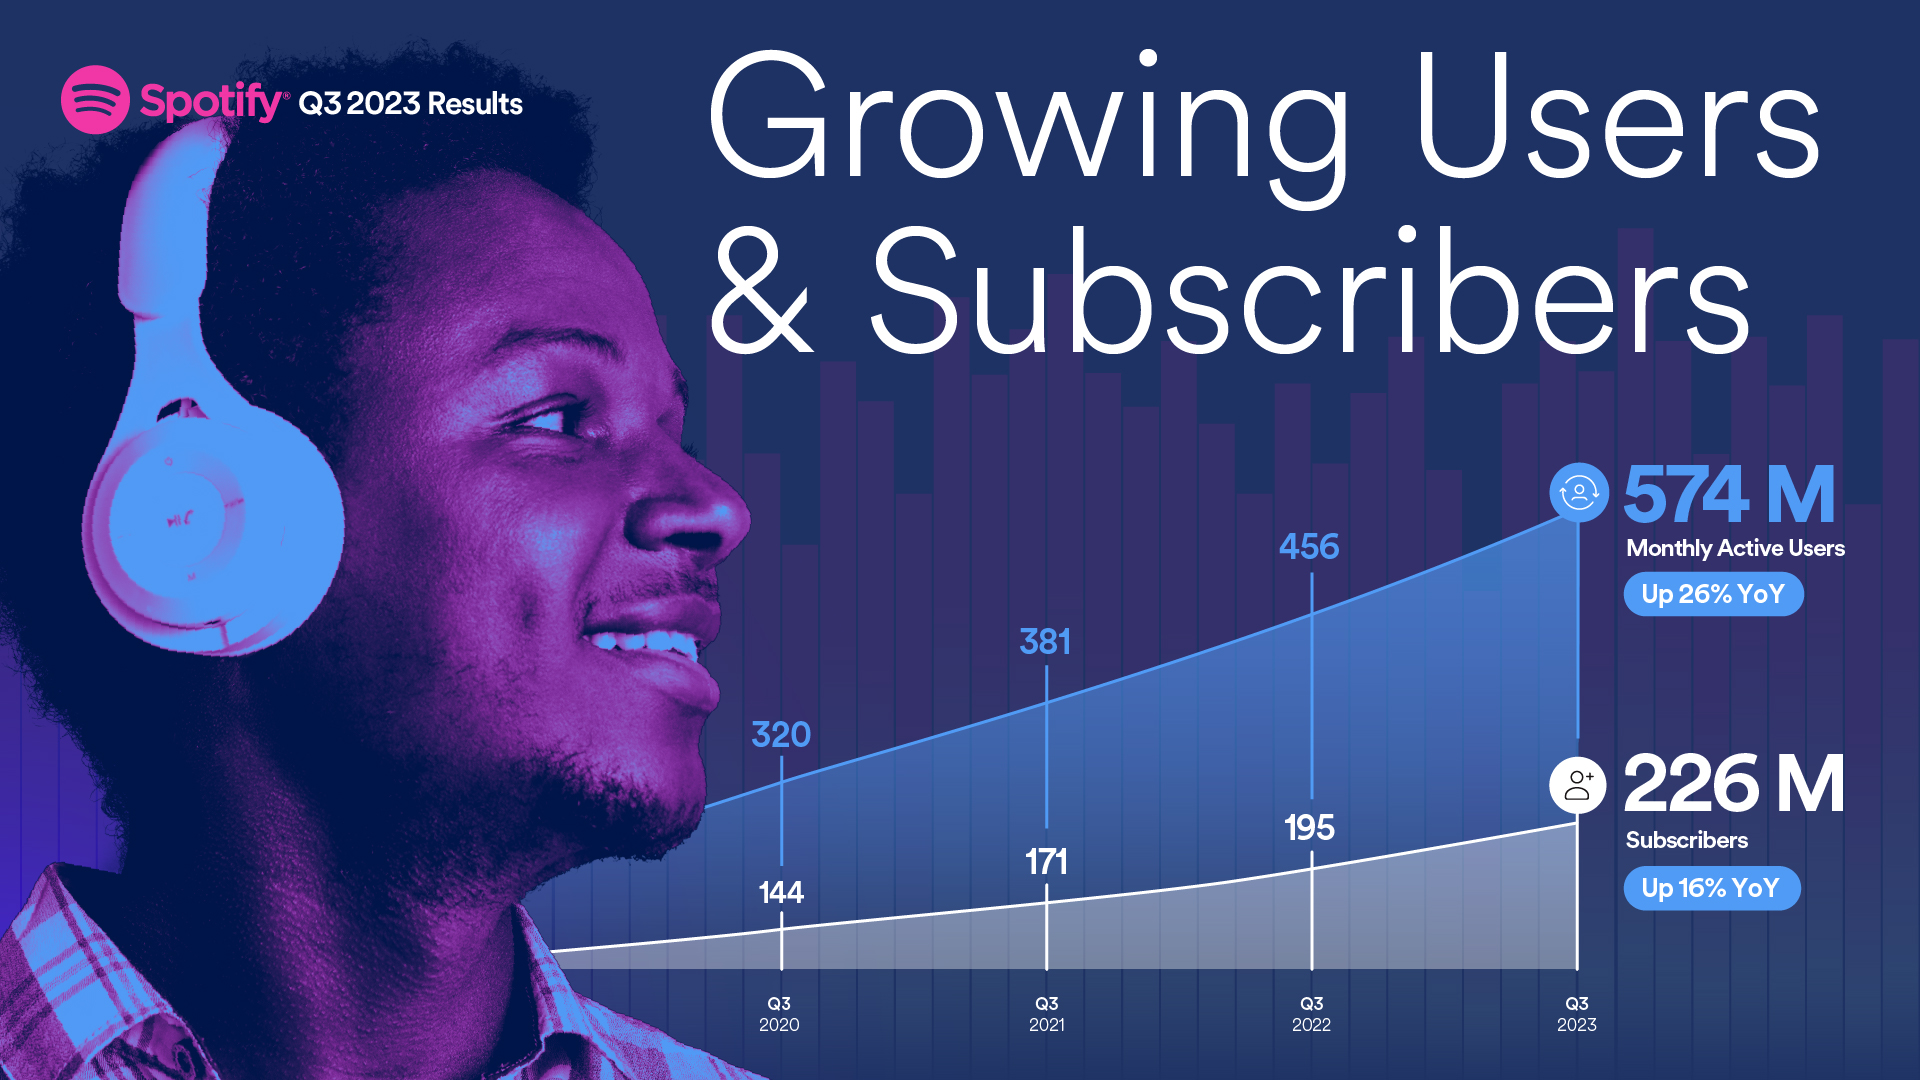 New listeners for your music! Spotify’s Q3 2023 earnings shows growing users and subscribers